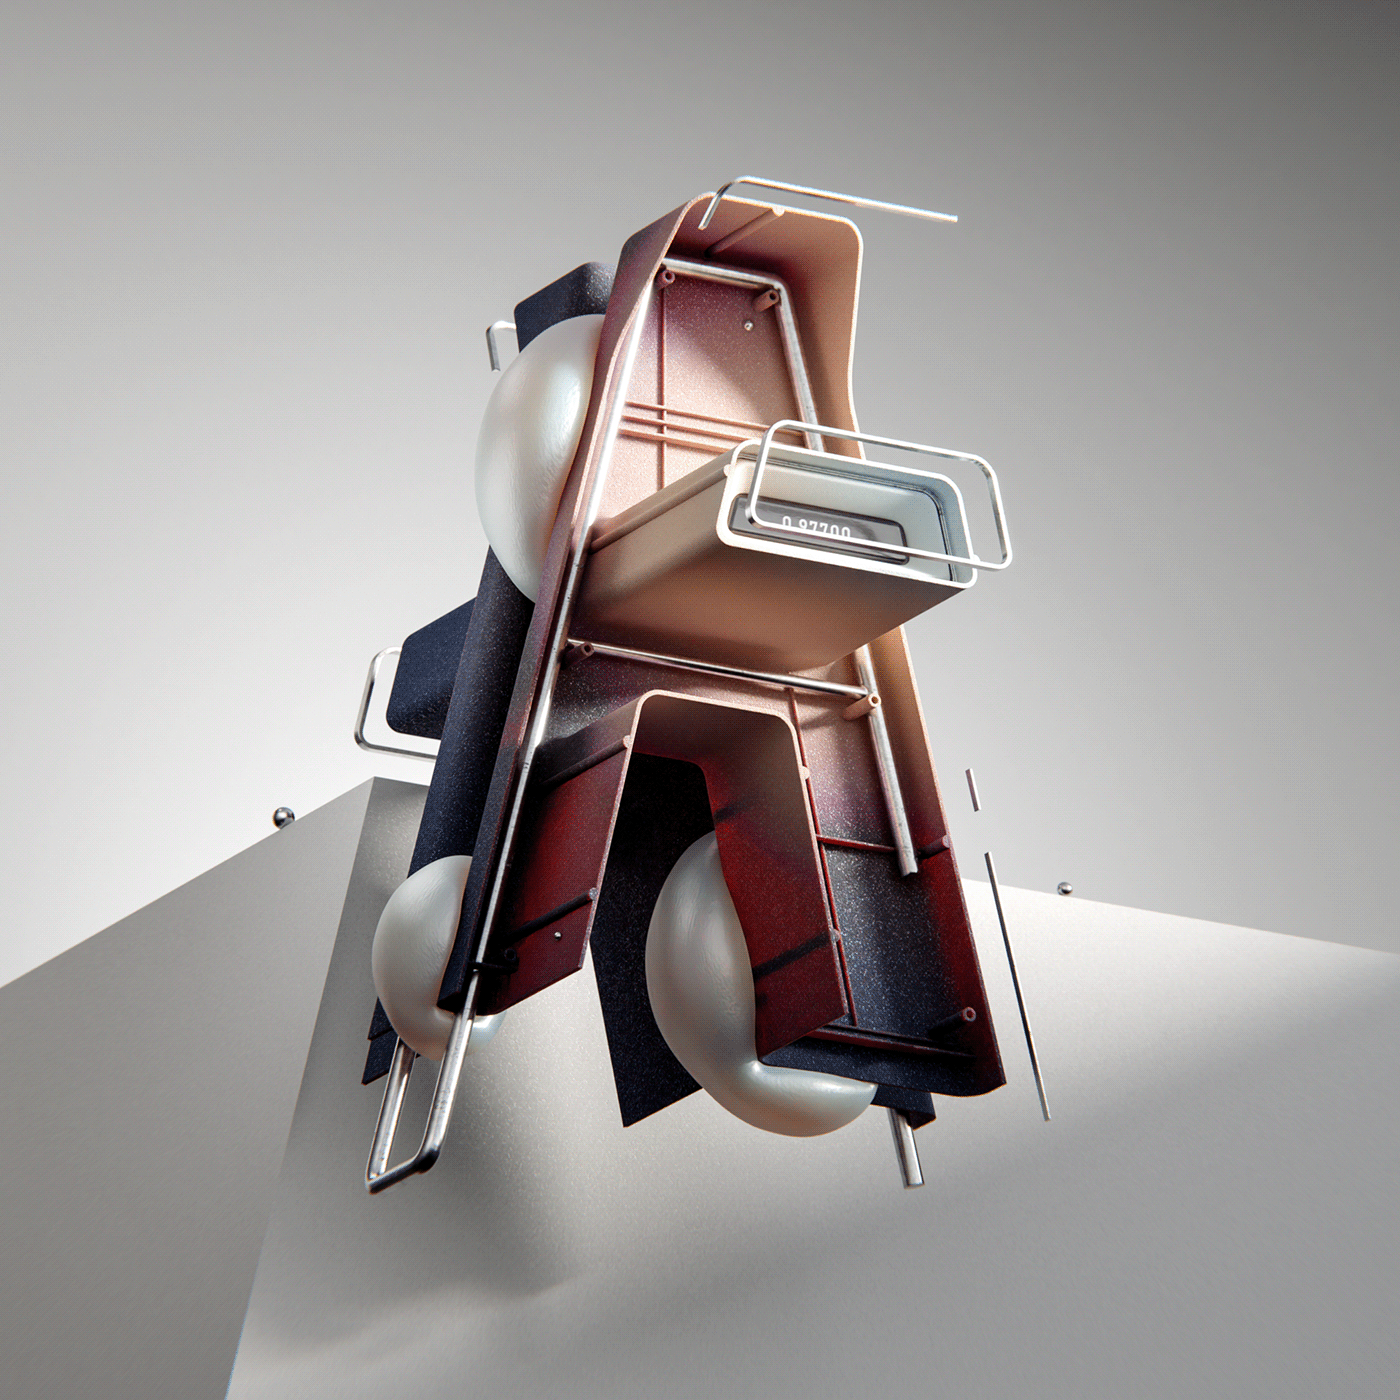 36daysoftype 36DAYSOFTYPE09 3D animation  art art direction  lettering letters surreal typography  